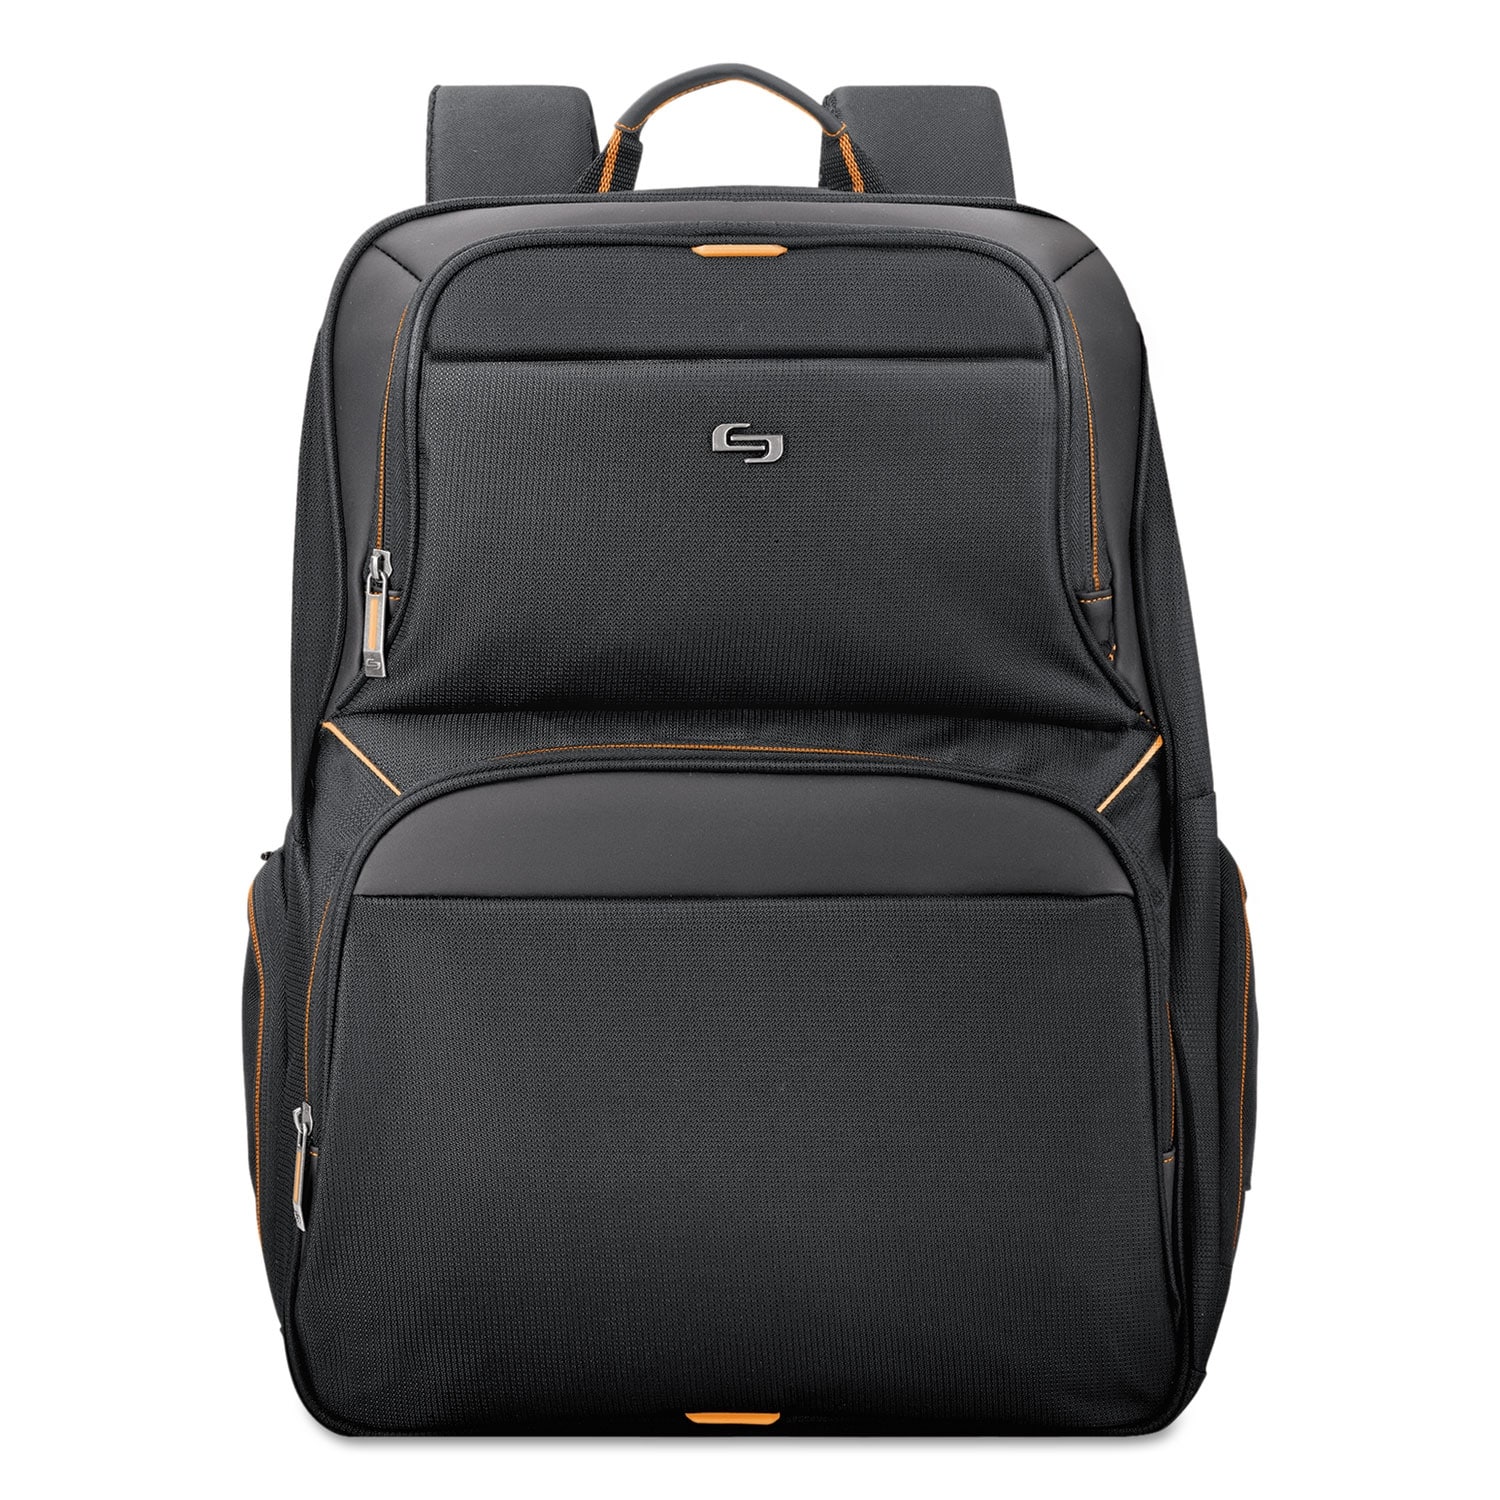 Urban Backpack Fits Devices Up to 17.3